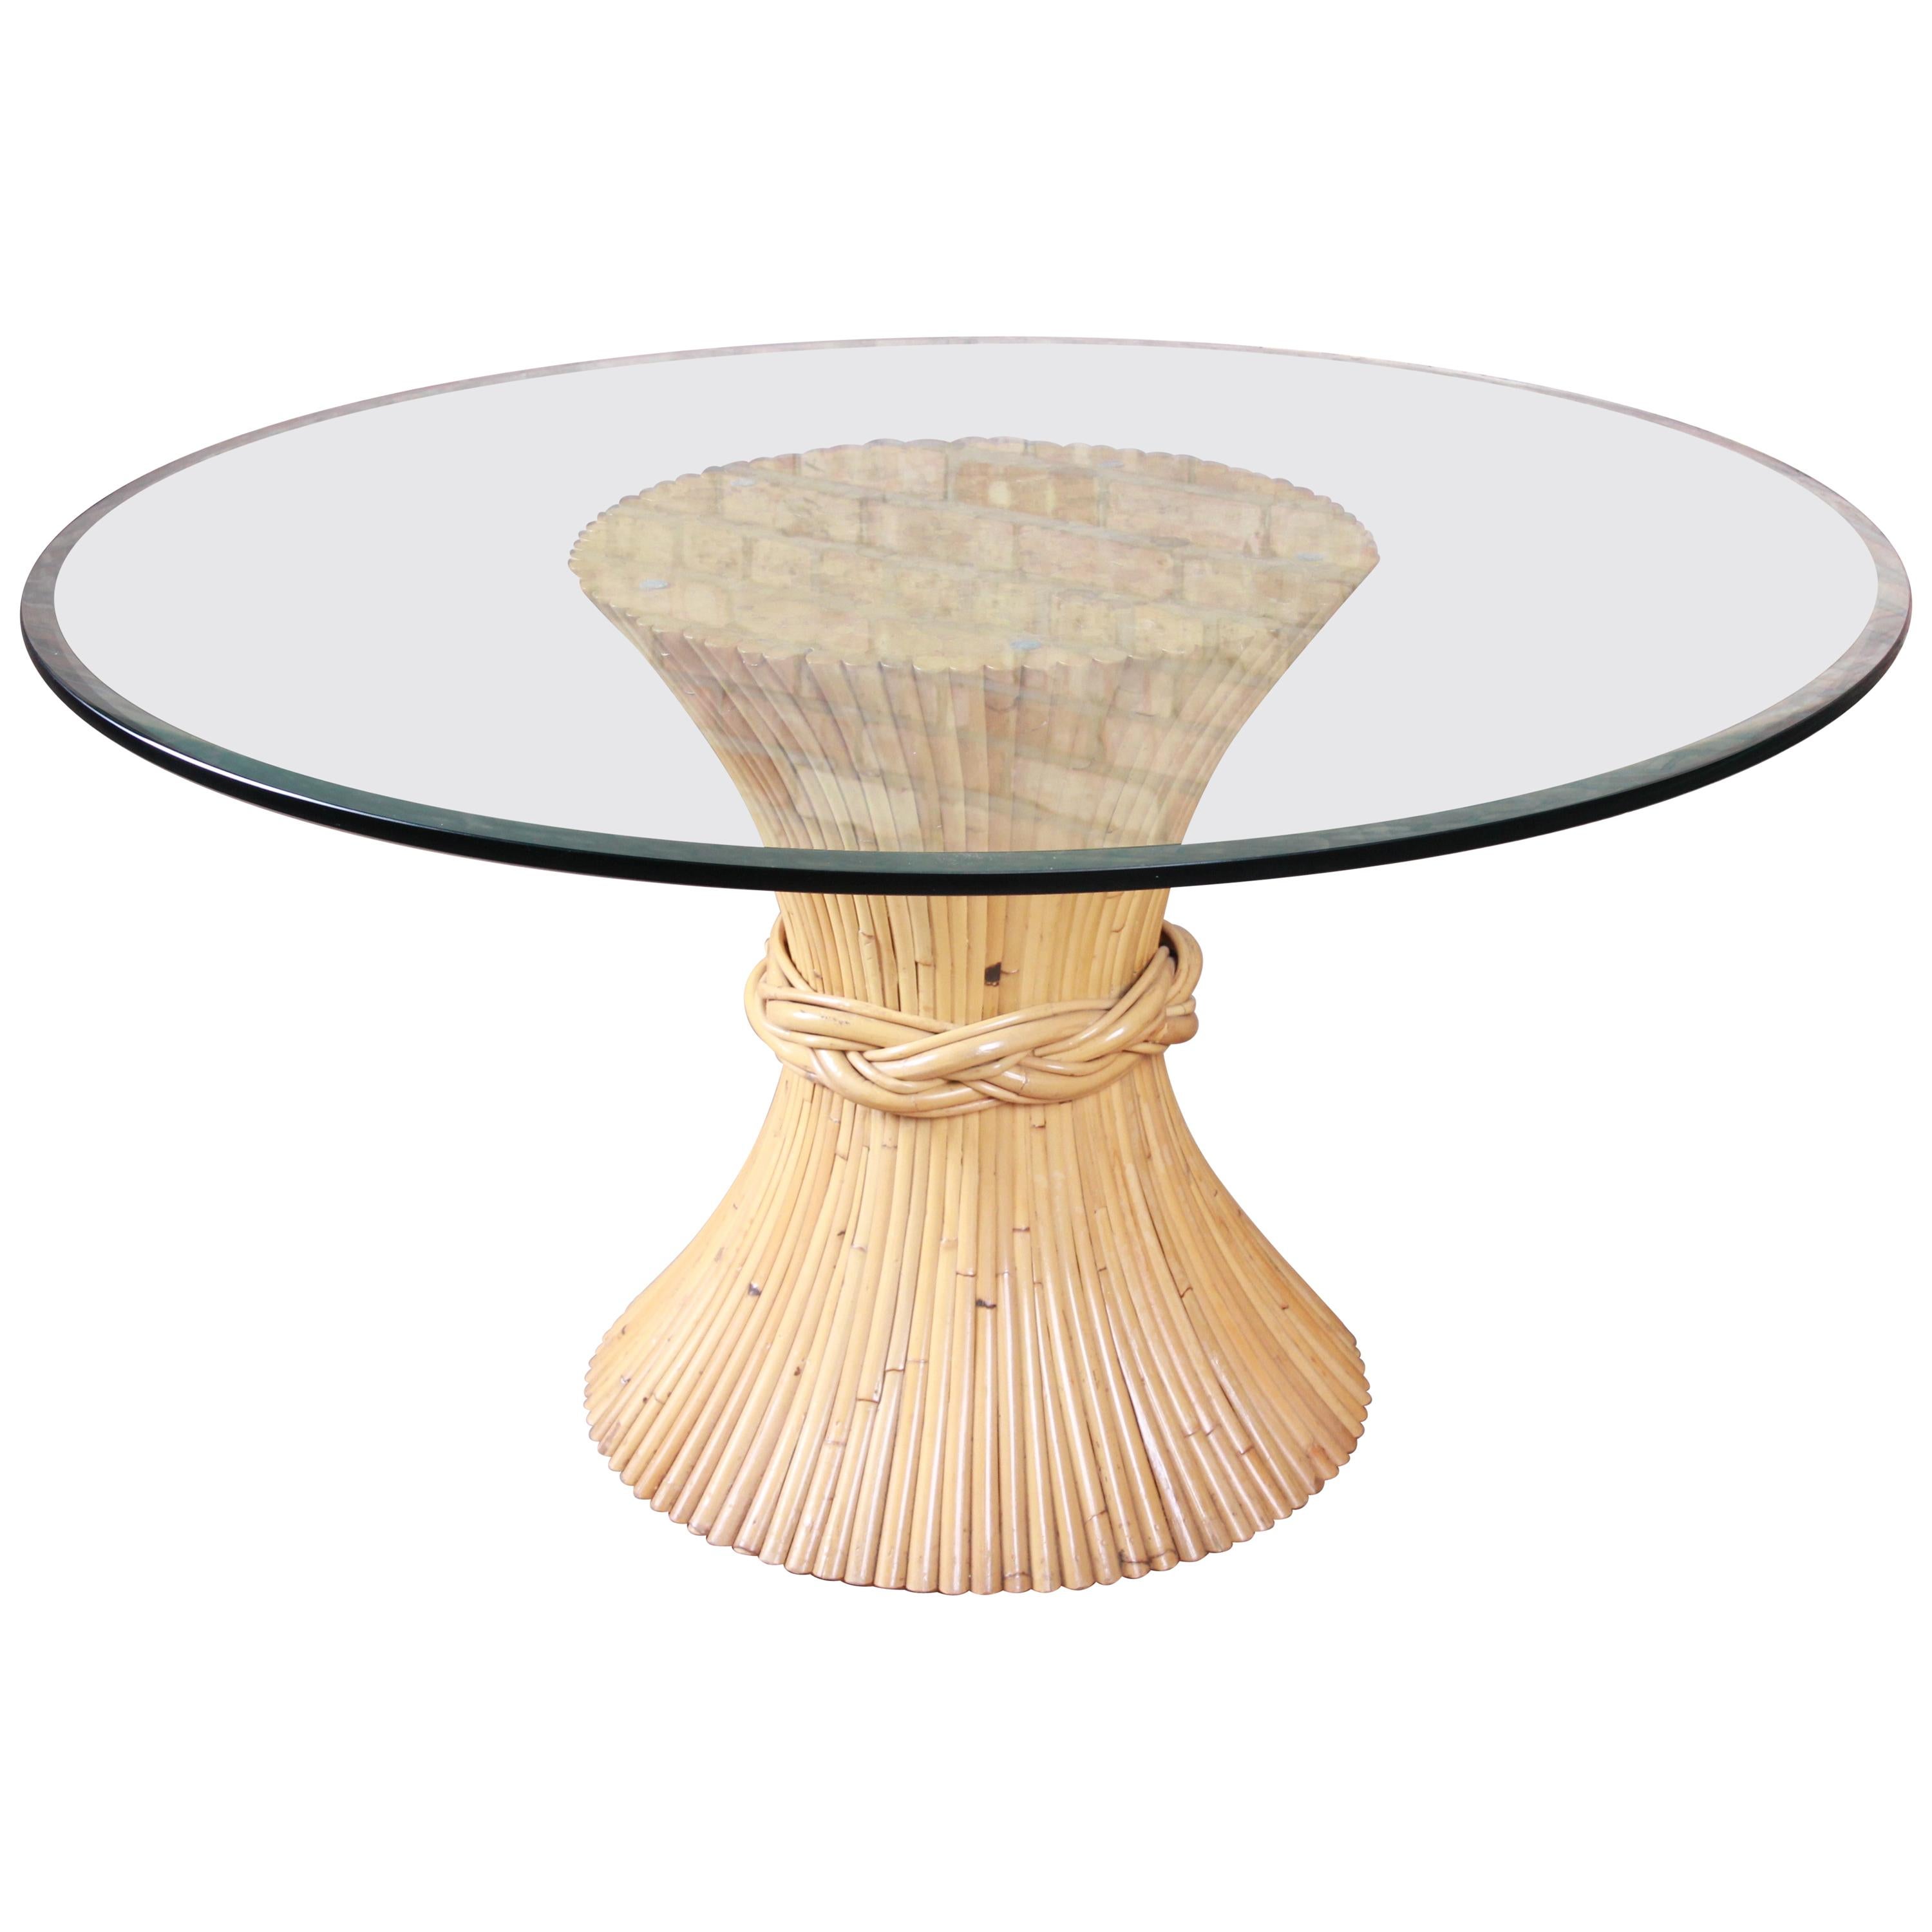 McGuire Midcentury Hollywood Regency Bamboo Sheaf of Wheat Pedestal Dining Table